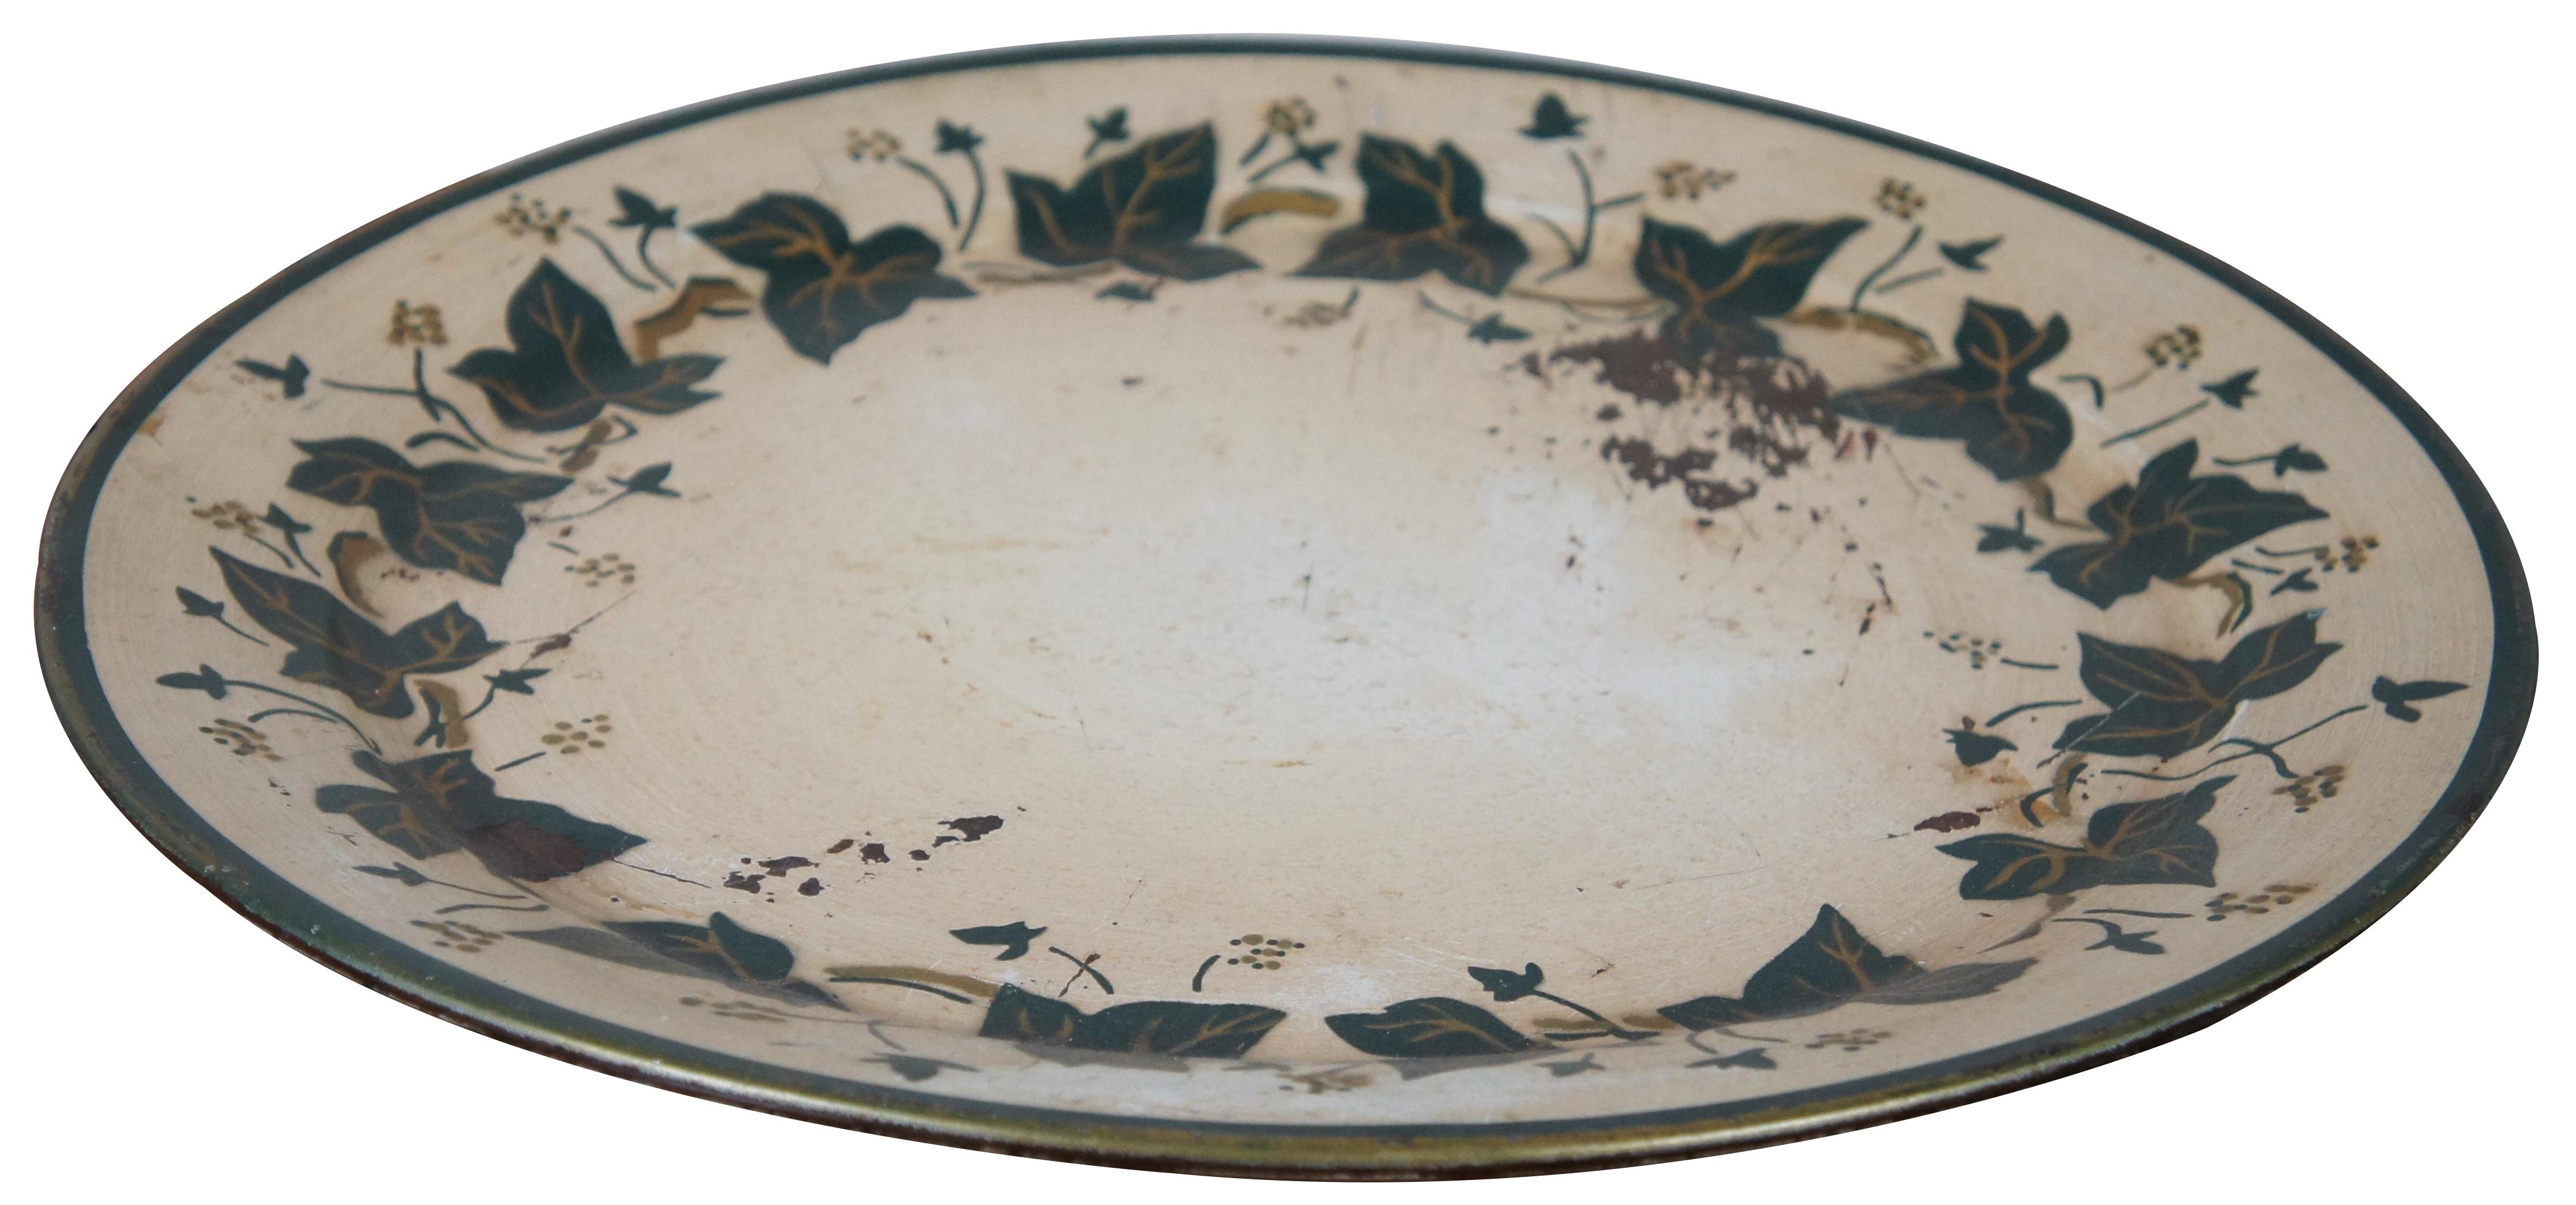 Vintage mid-20th century round metal tray painted in white with a green edges and border of vining ivy leaves.